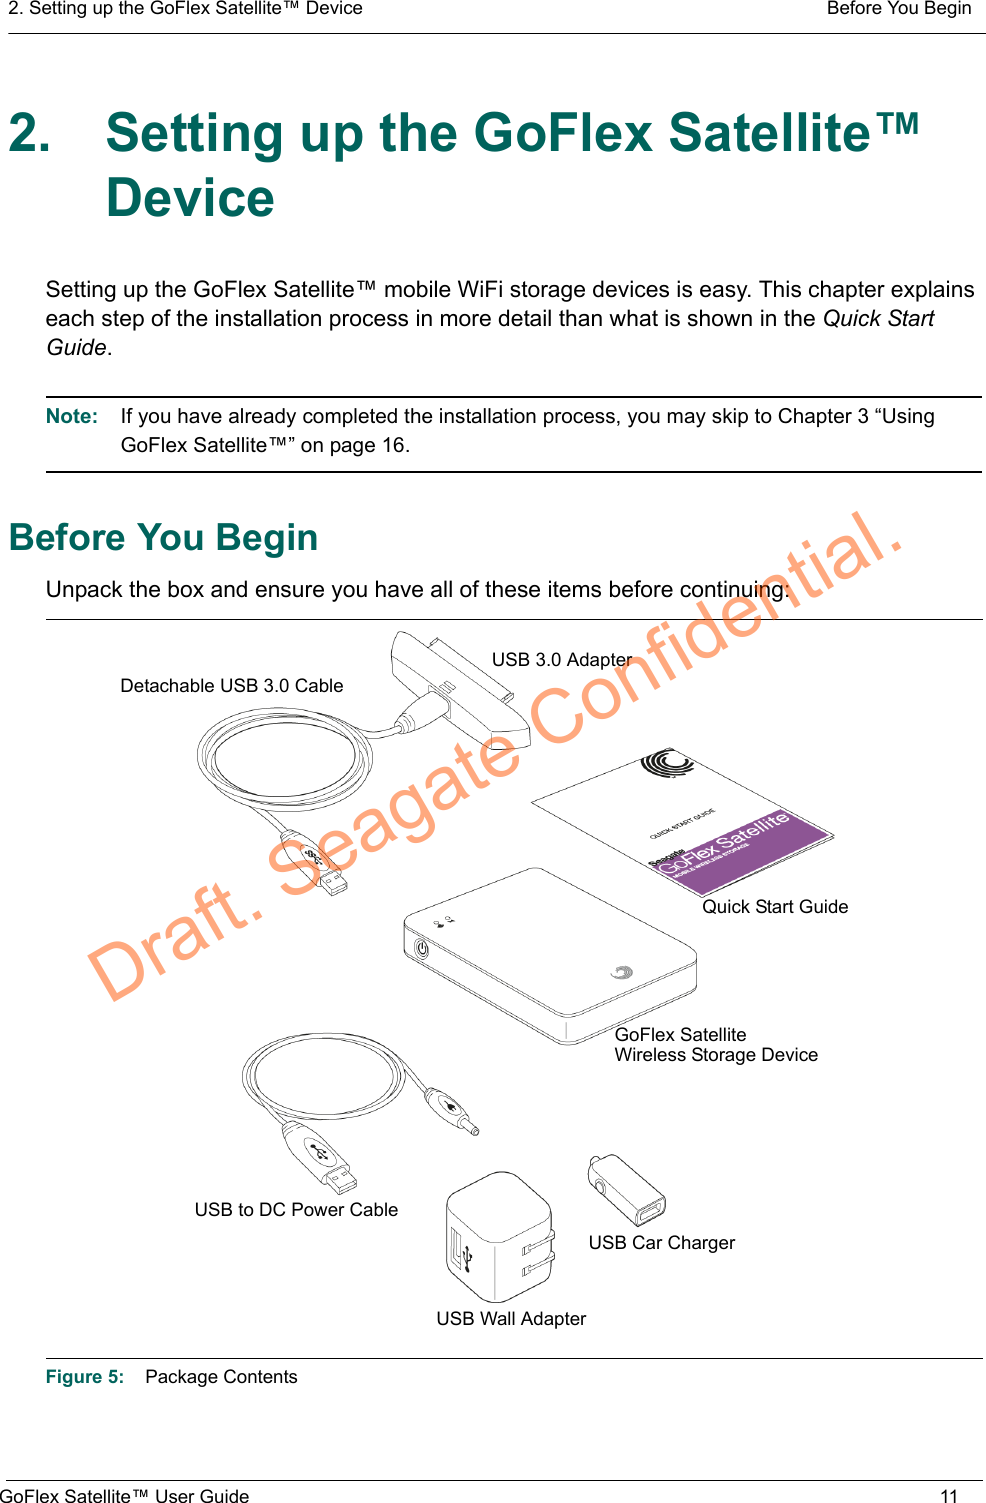 2. Setting up the GoFlex Satellite™ Device  Before You BeginGoFlex Satellite™ User Guide 112. Setting up the GoFlex Satellite™ DeviceSetting up the GoFlex Satellite™ mobile WiFi storage devices is easy. This chapter explains each step of the installation process in more detail than what is shown in the Quick Start Guide.Note:  If you have already completed the installation process, you may skip to Chapter 3 “Using GoFlex Satellite™” on page 16.Before You BeginUnpack the box and ensure you have all of these items before continuing:Figure 5:    Package ContentsUSB Wall AdapterUSB 3.0 AdapterUSB to DC Power CableQuick Start GuideUSB Car ChargerDetachable USB 3.0 CableGoFlex SatelliteWireless Storage DeviceDraft. Seagate Confidential.